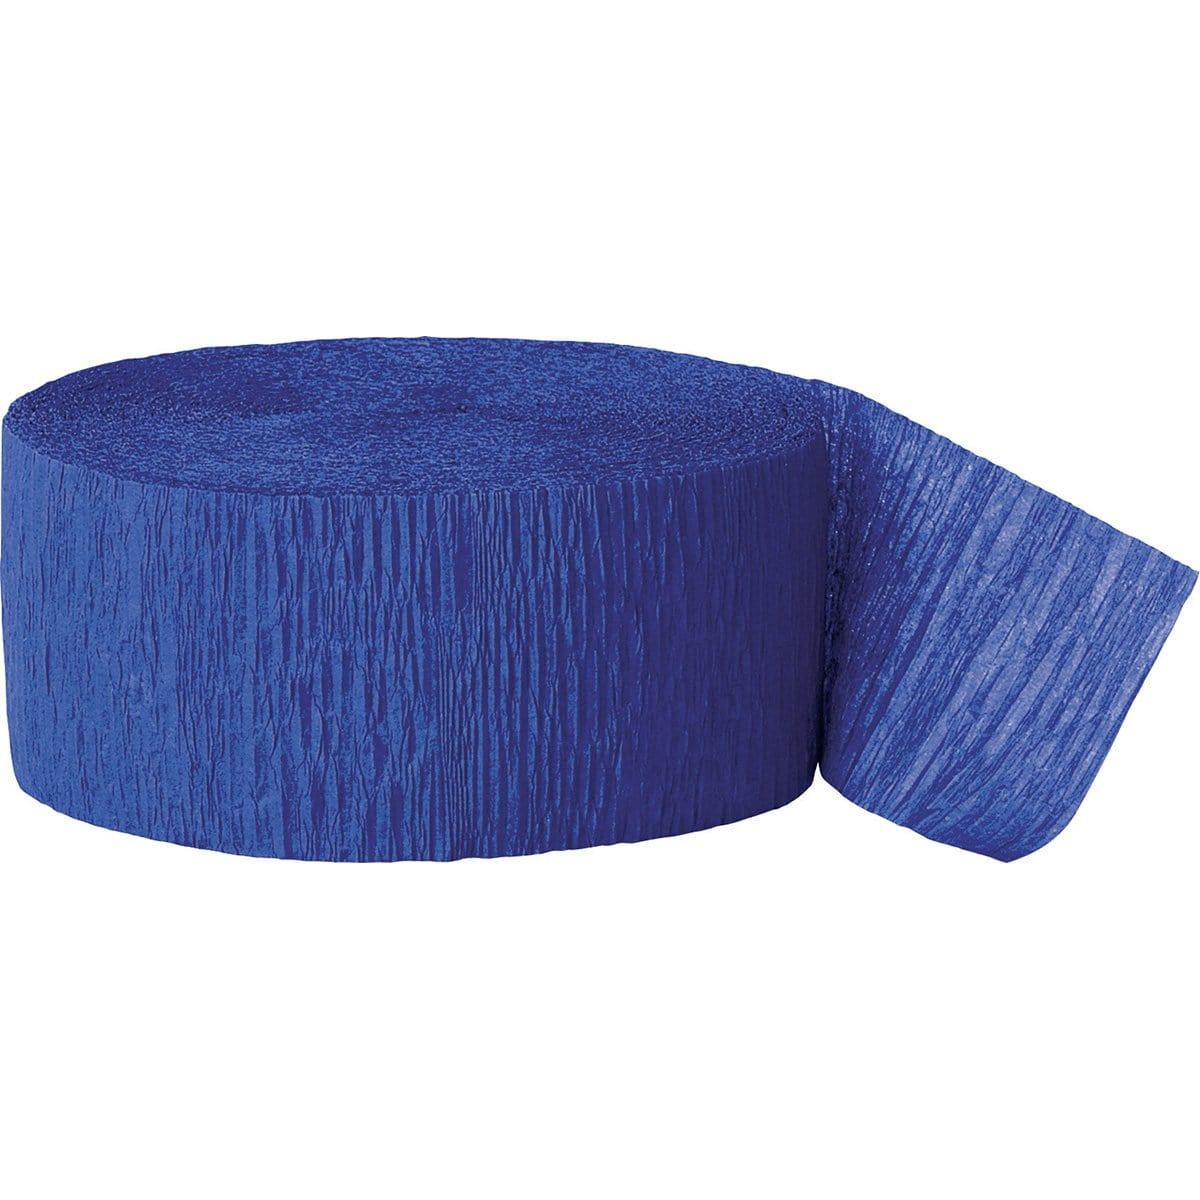 Buy Decorations Crepe Streamer - Royal Blue 81 Ft sold at Party Expert